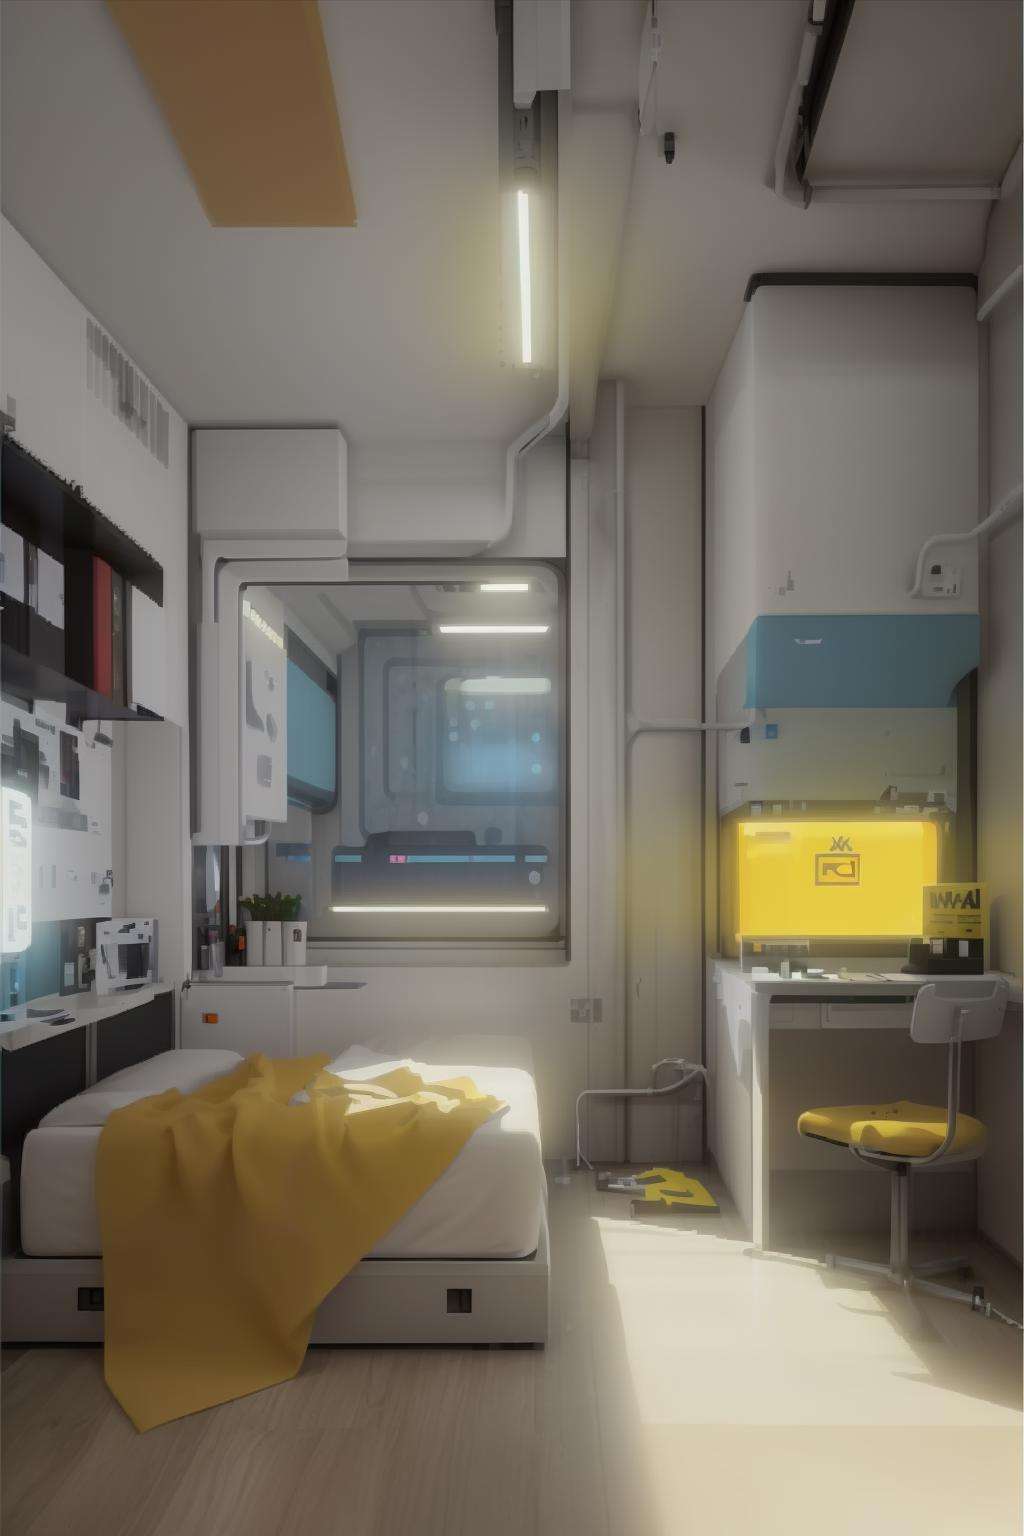 a room with a large window and a bed in it with a white sheet on the floor and a yellow line on the wall, Filip Hodas, cgstudio, computer graphics, space art , cyber_room  , cyberpunk ambient, a room